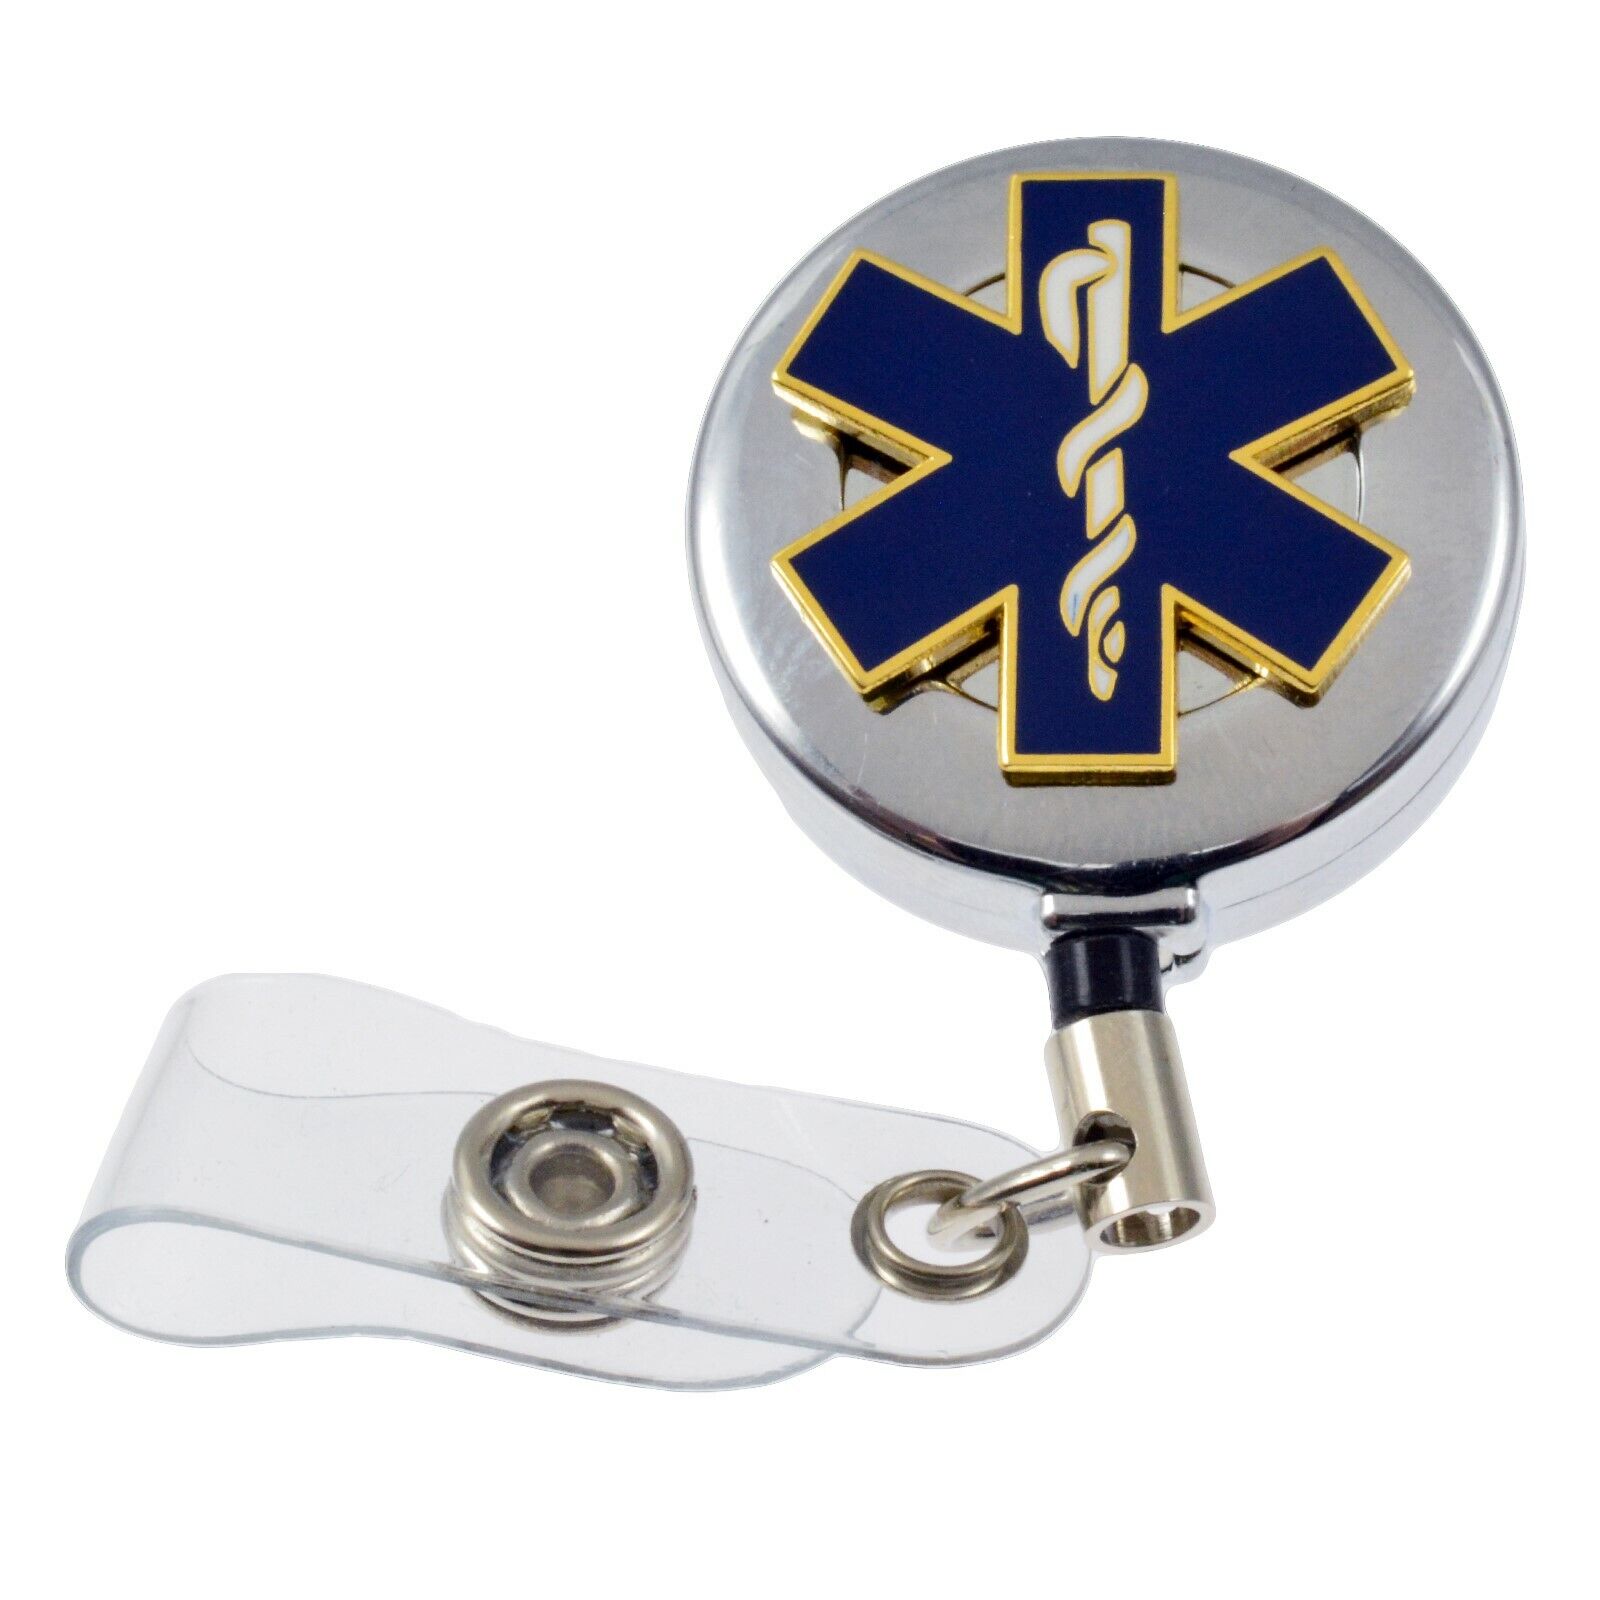 Chrome Star of Life EMS EMT Retractable Security ID Card Badge Holder Reel